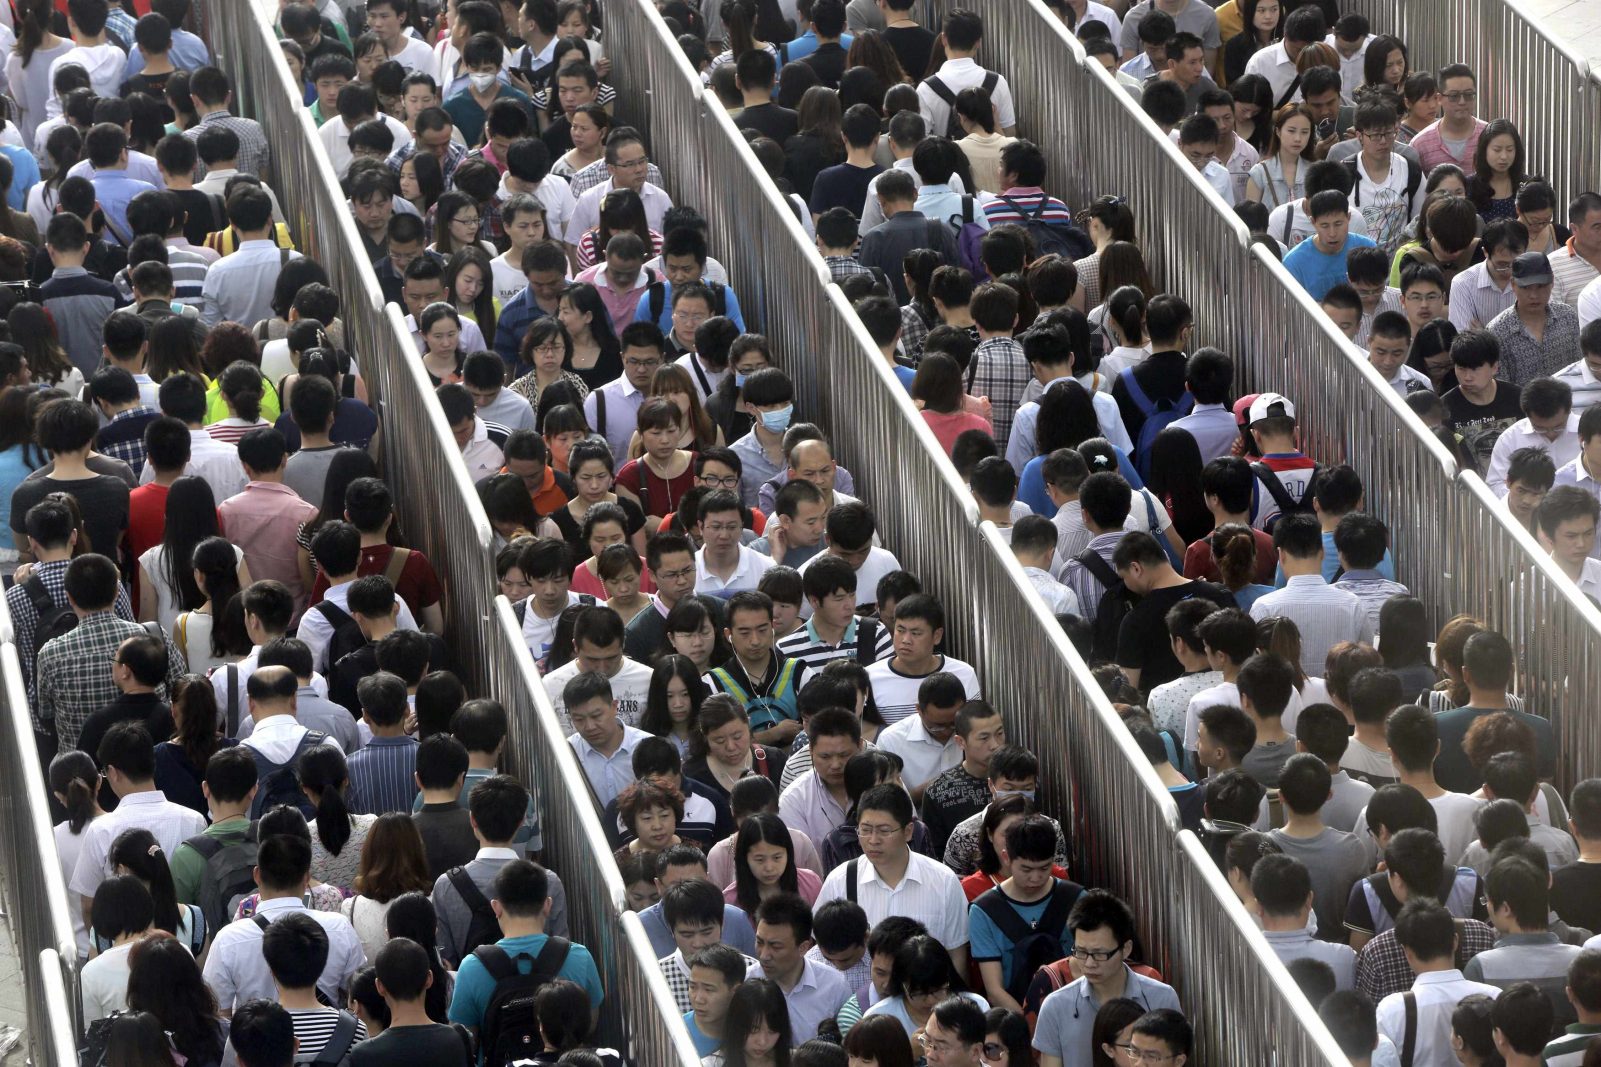 Can We Guess Your Age Based on This Anger Management Test? Passengers line up and wait for a security check during morning rush hour at Tiantongyuan North Station in Beijing